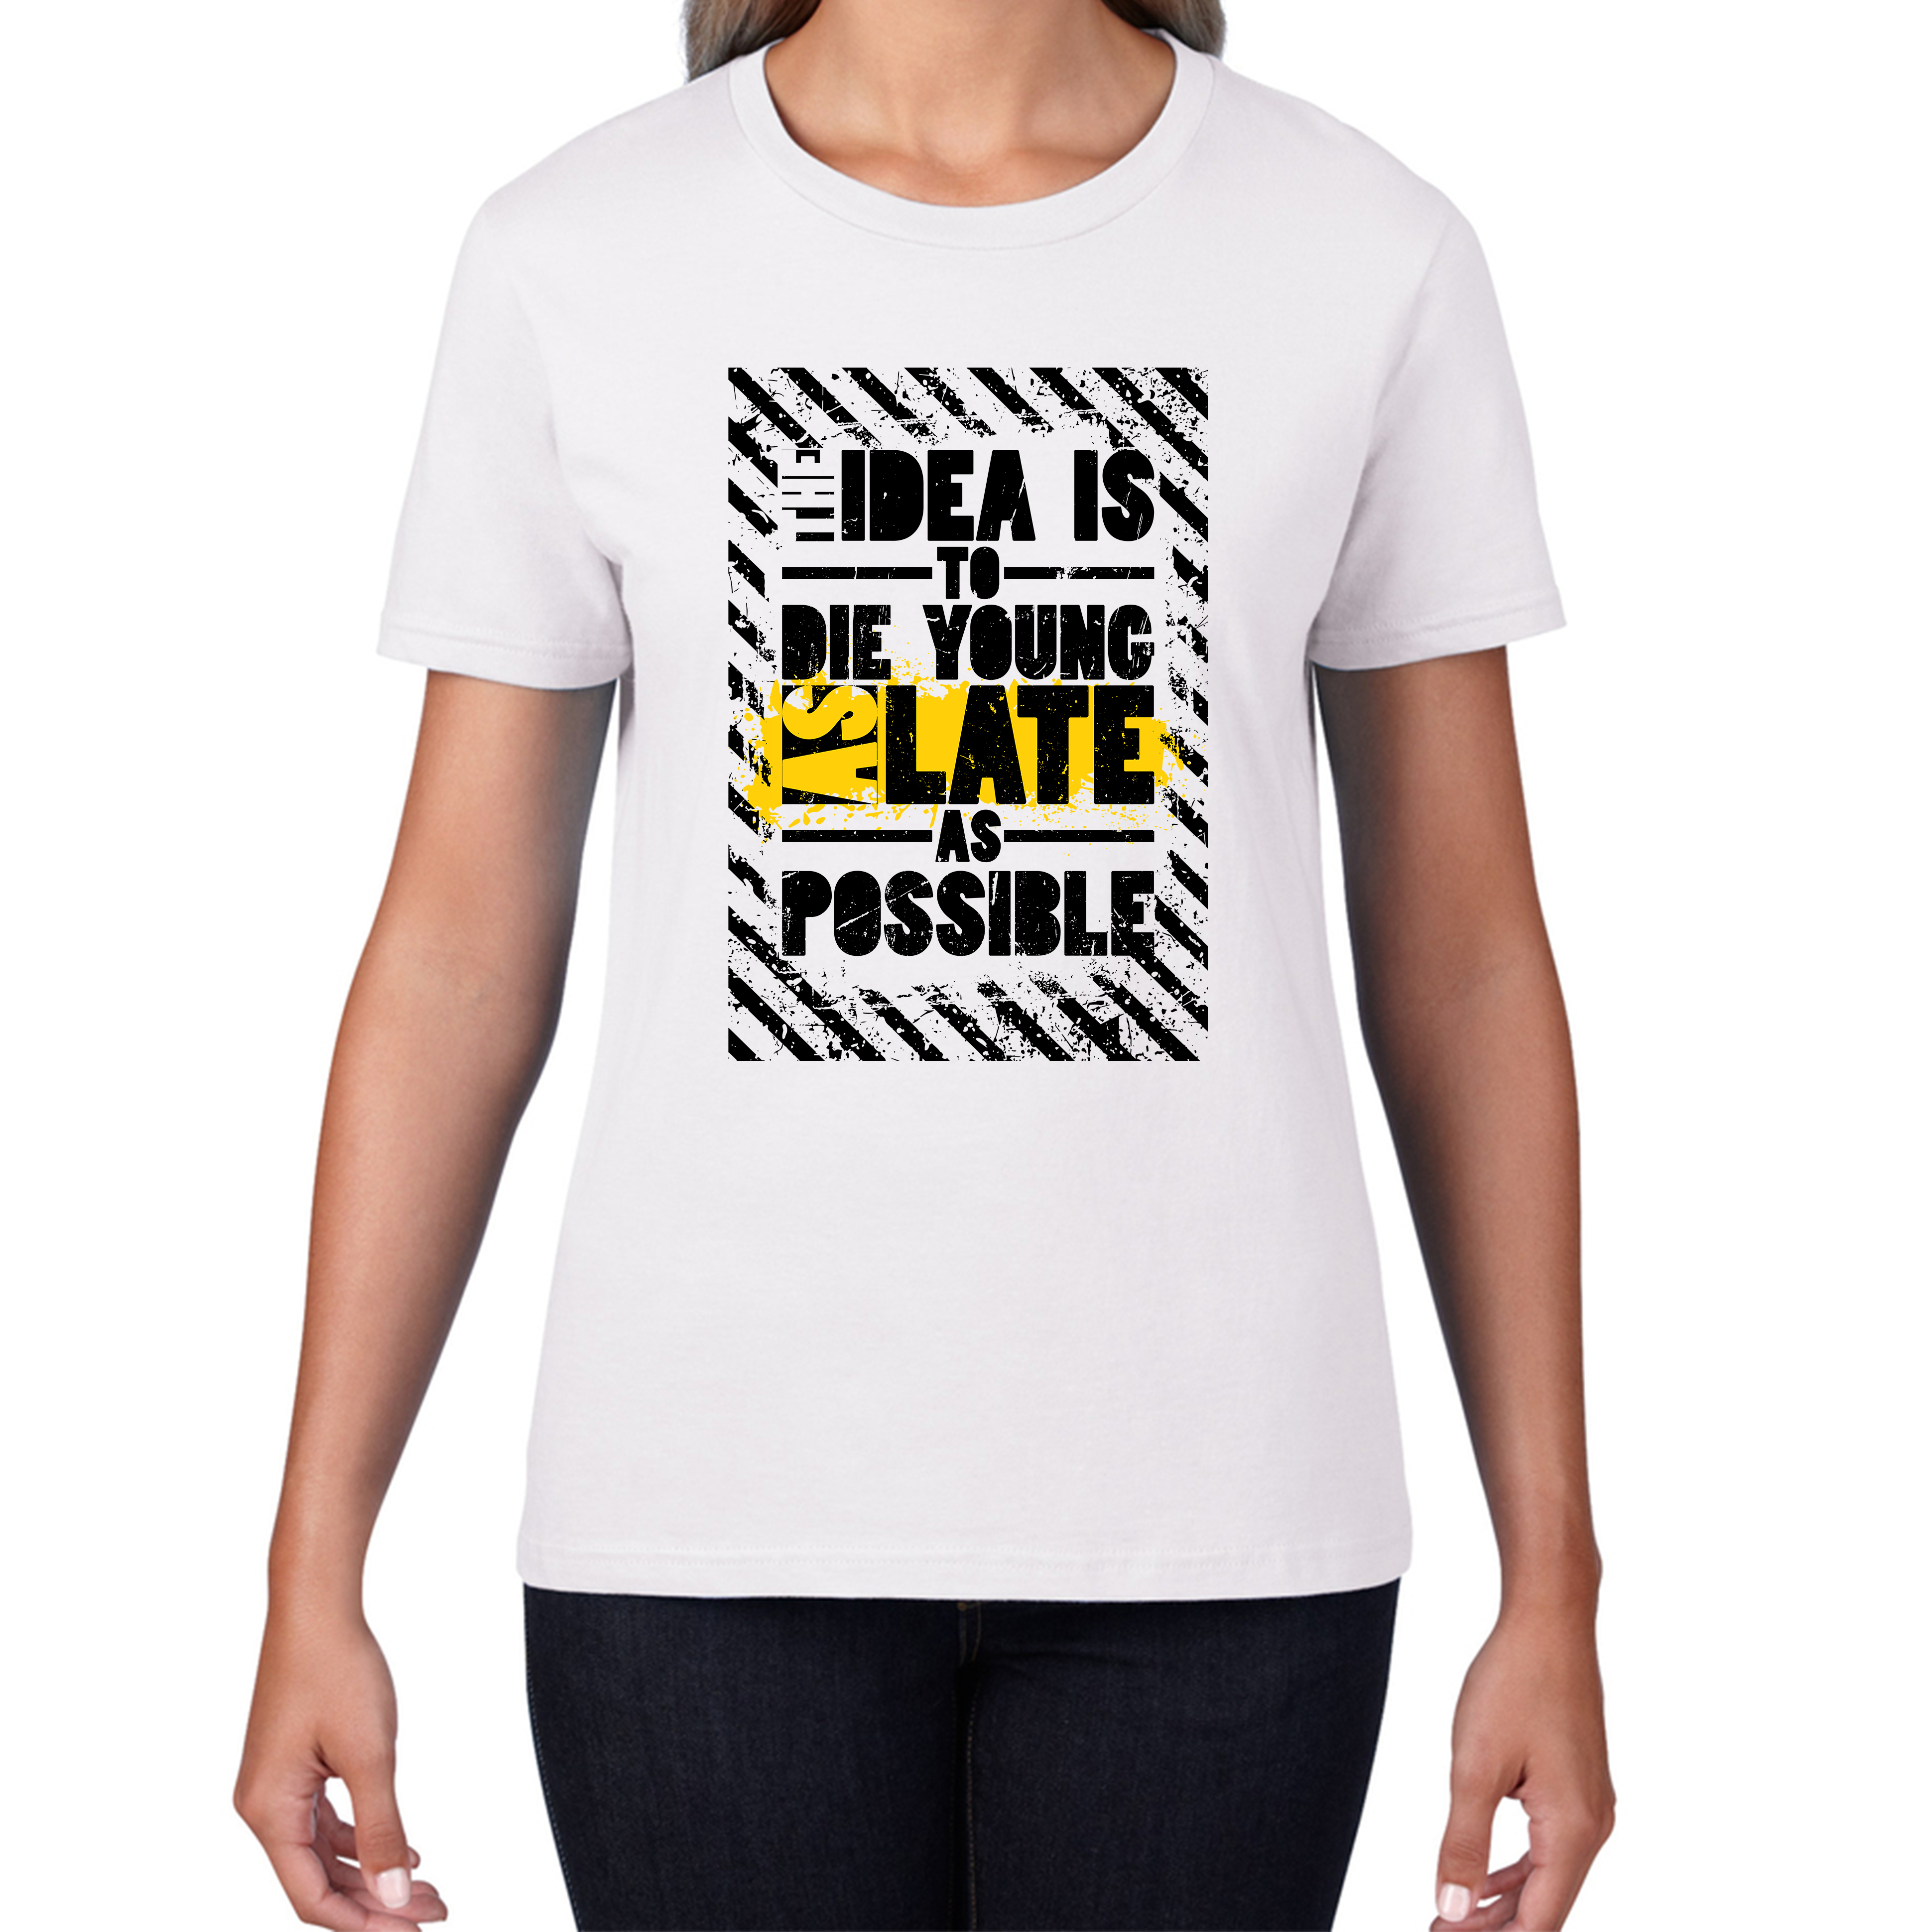 The Idea Is To Die Young As Late As Possible Funny Sarcastic Quote By Ashley Montagu Womens Tee Top